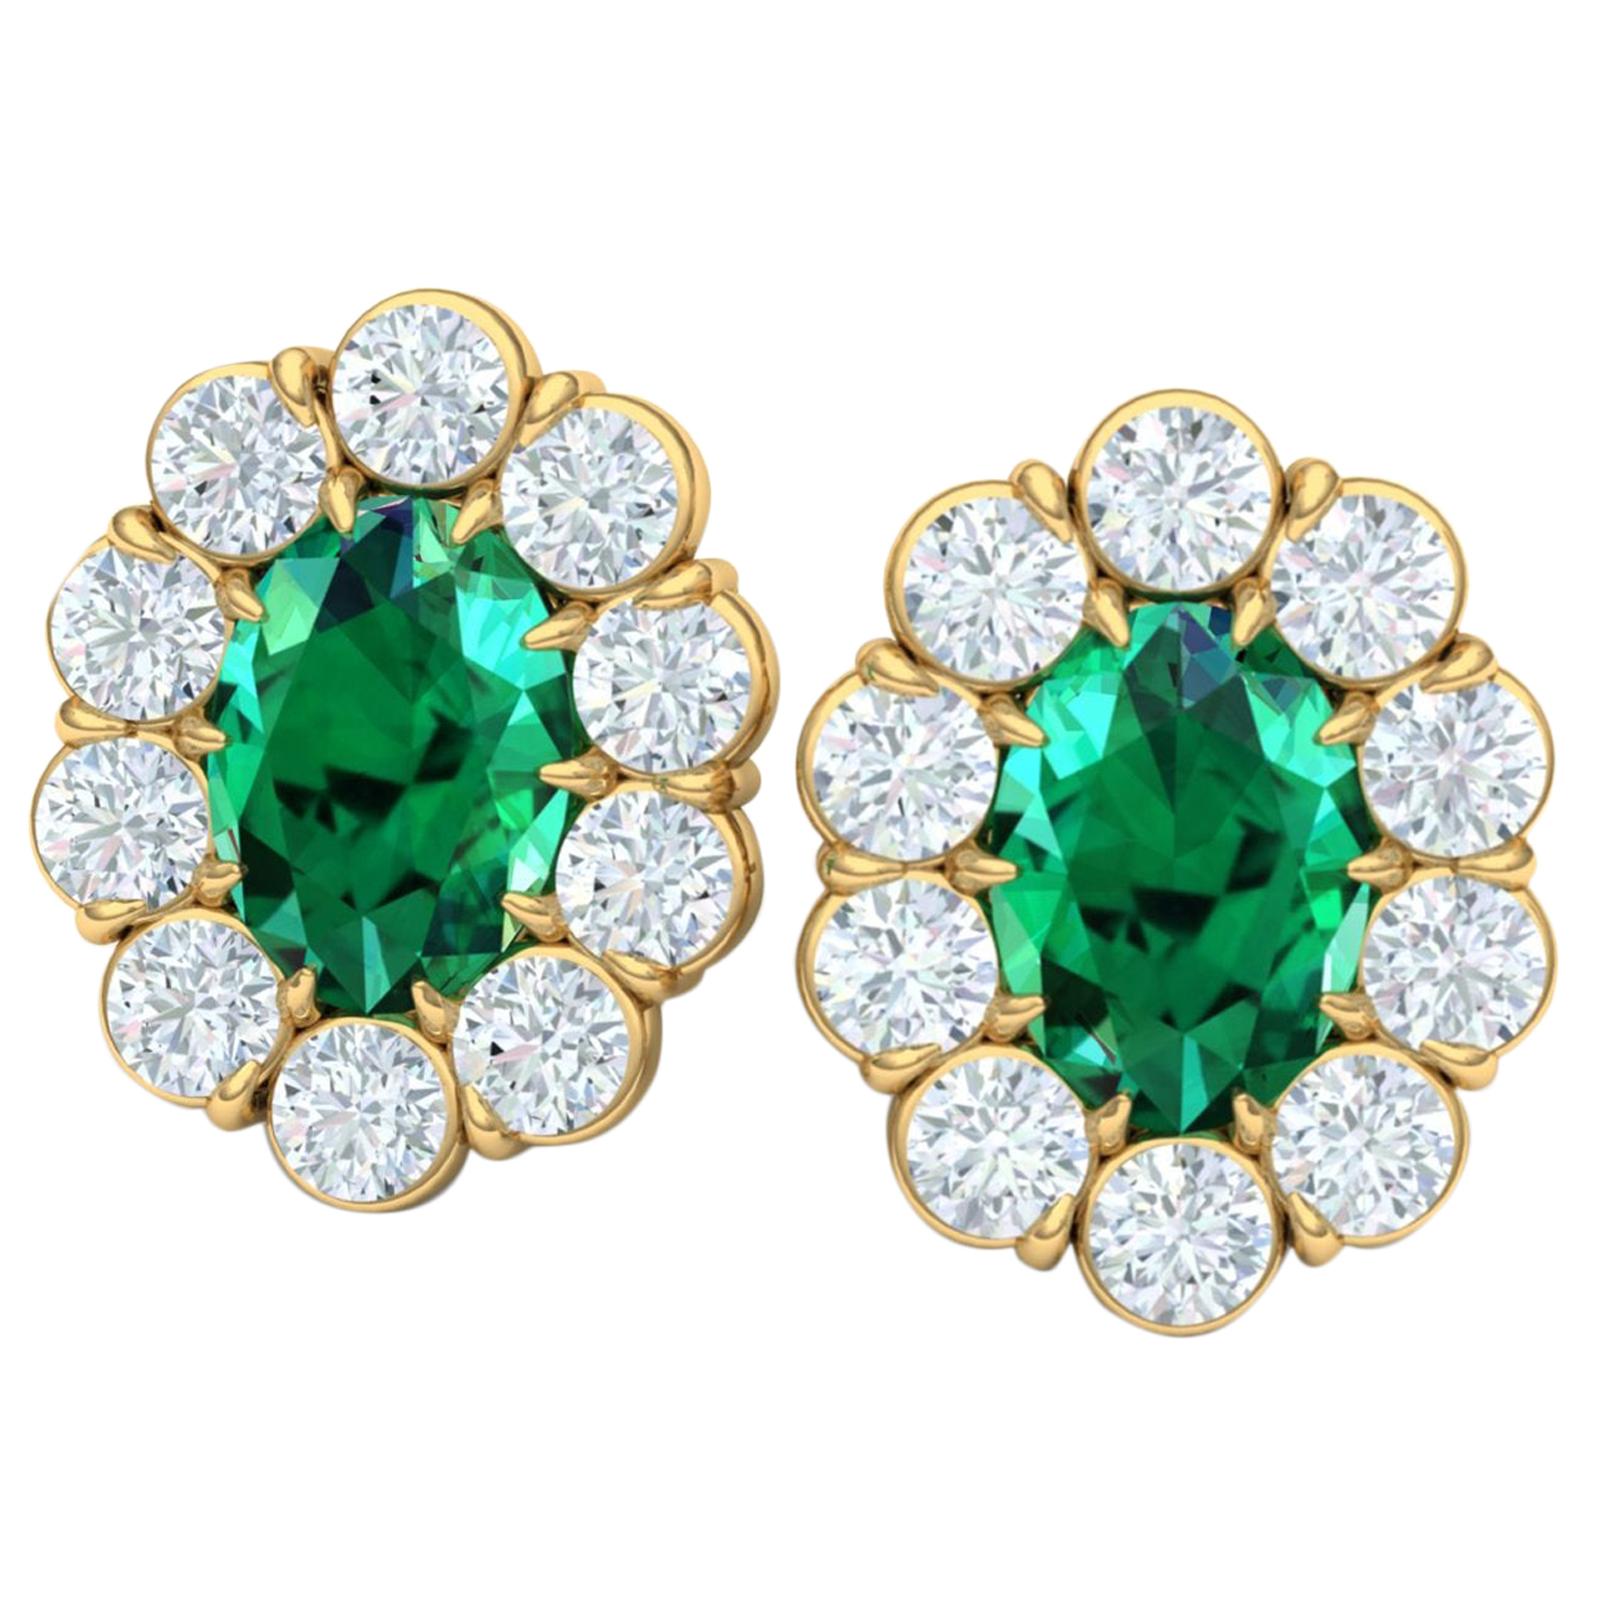 2.4 Carat Emerald and Diamond Halo Earrings For Sale